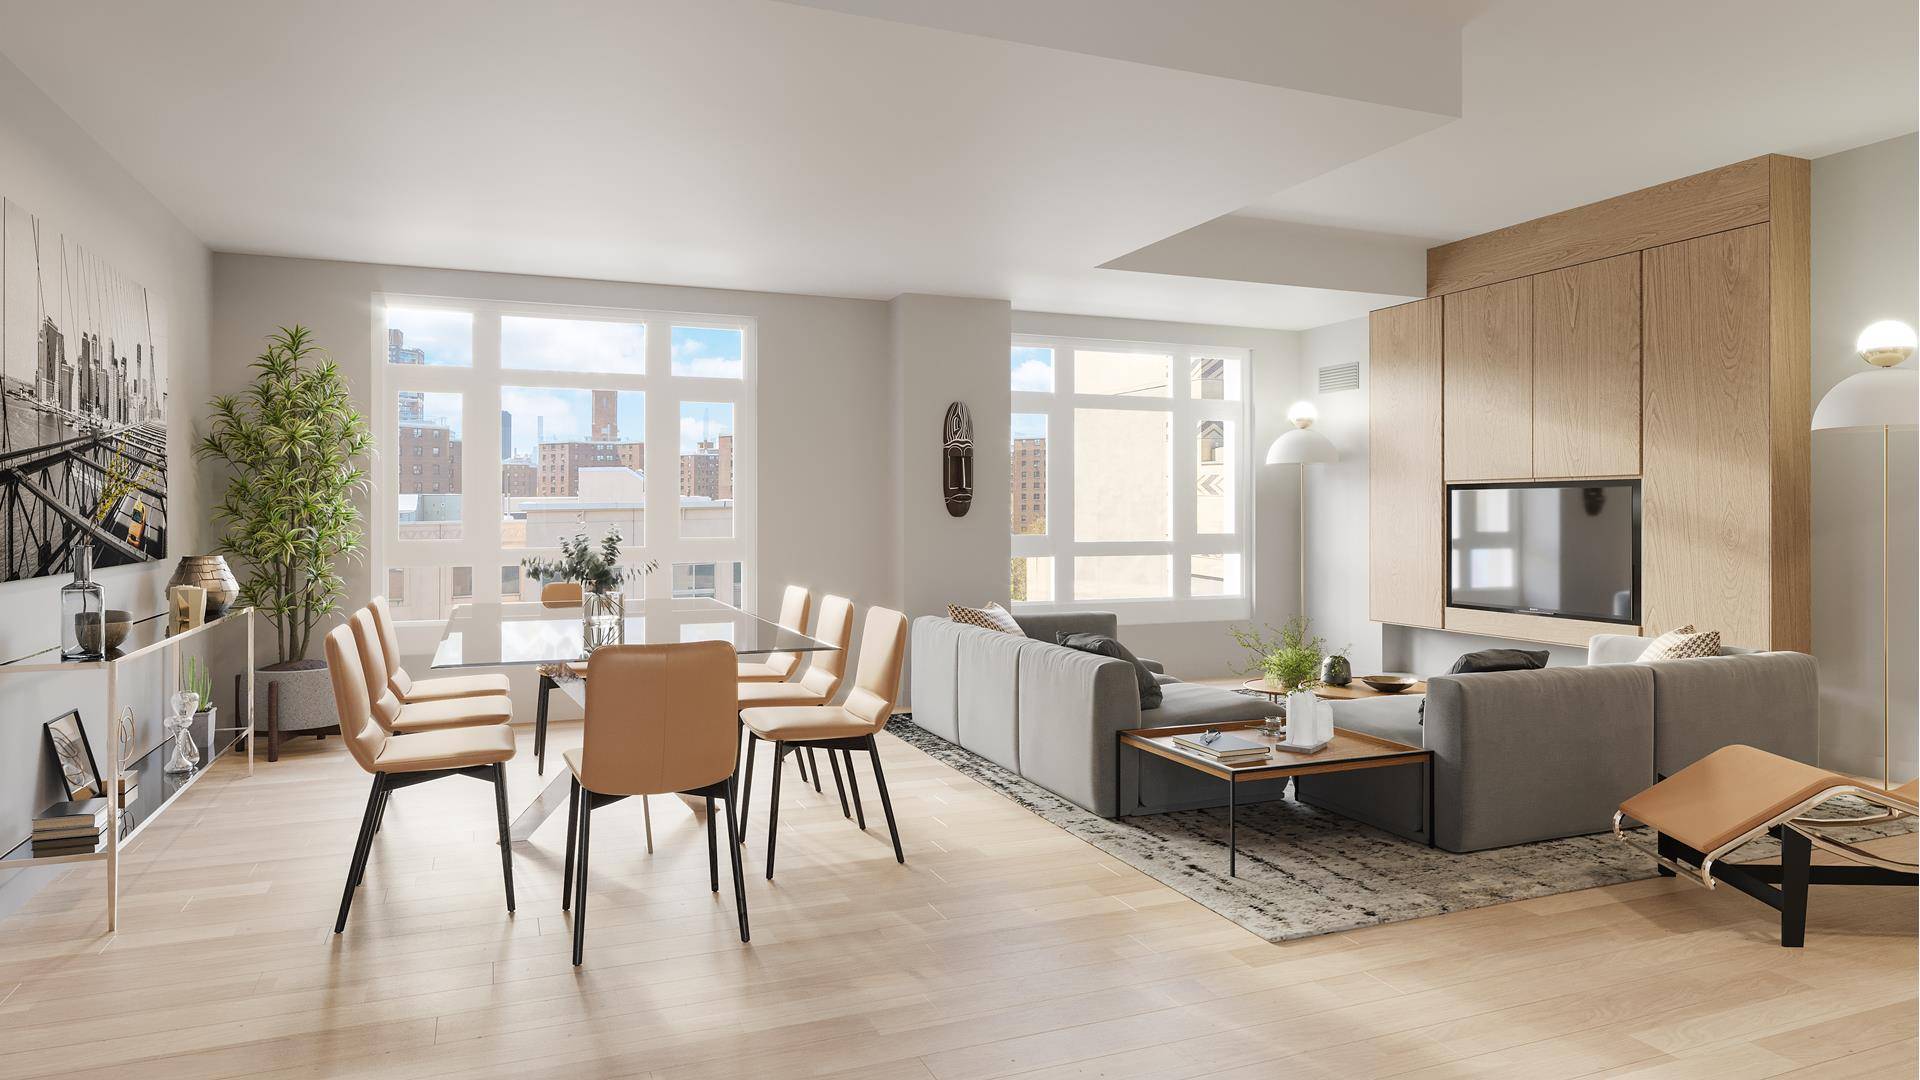 Amazing Price. Act Fast. Brand new north facing 3 BdRm 2 bath condominium residence with terrace at the PATAGONIA, a ground up 12 story development just now completed in Central ...